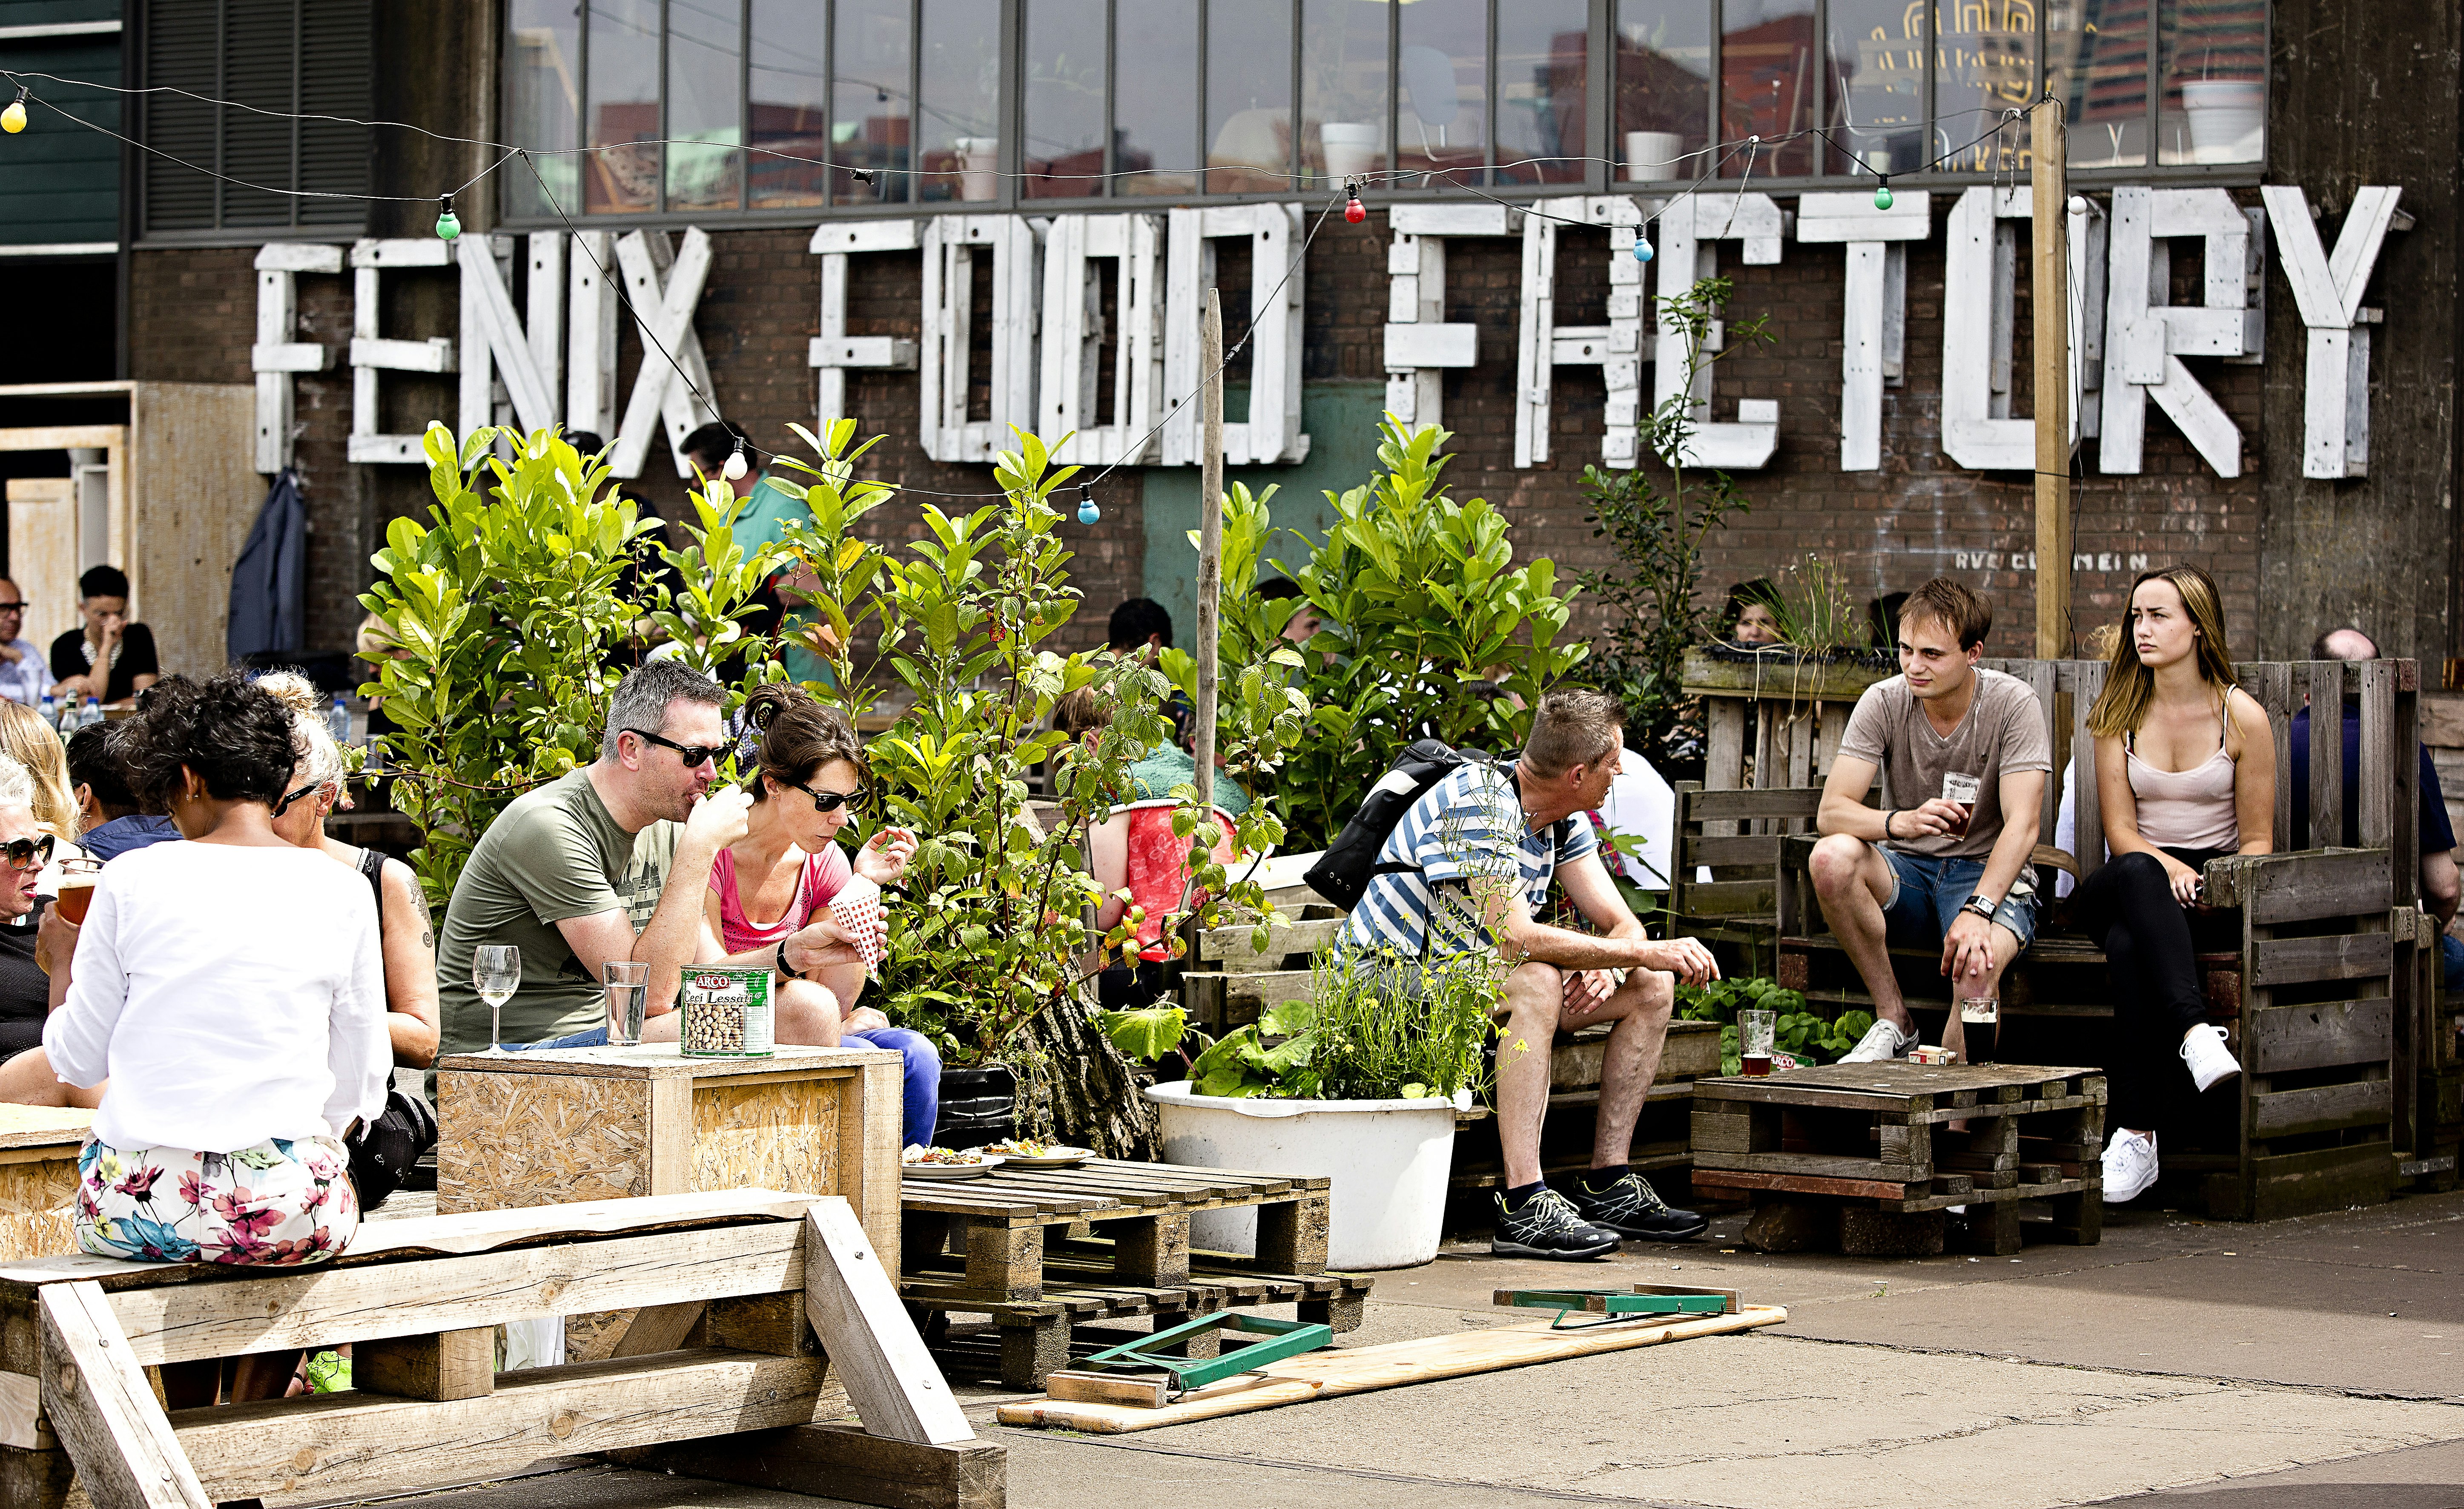 Many people are sitting on makeshift wooden-pallet furniture outside converted warehouse Fenix Food Factory in Rotterdam on a sunny day.